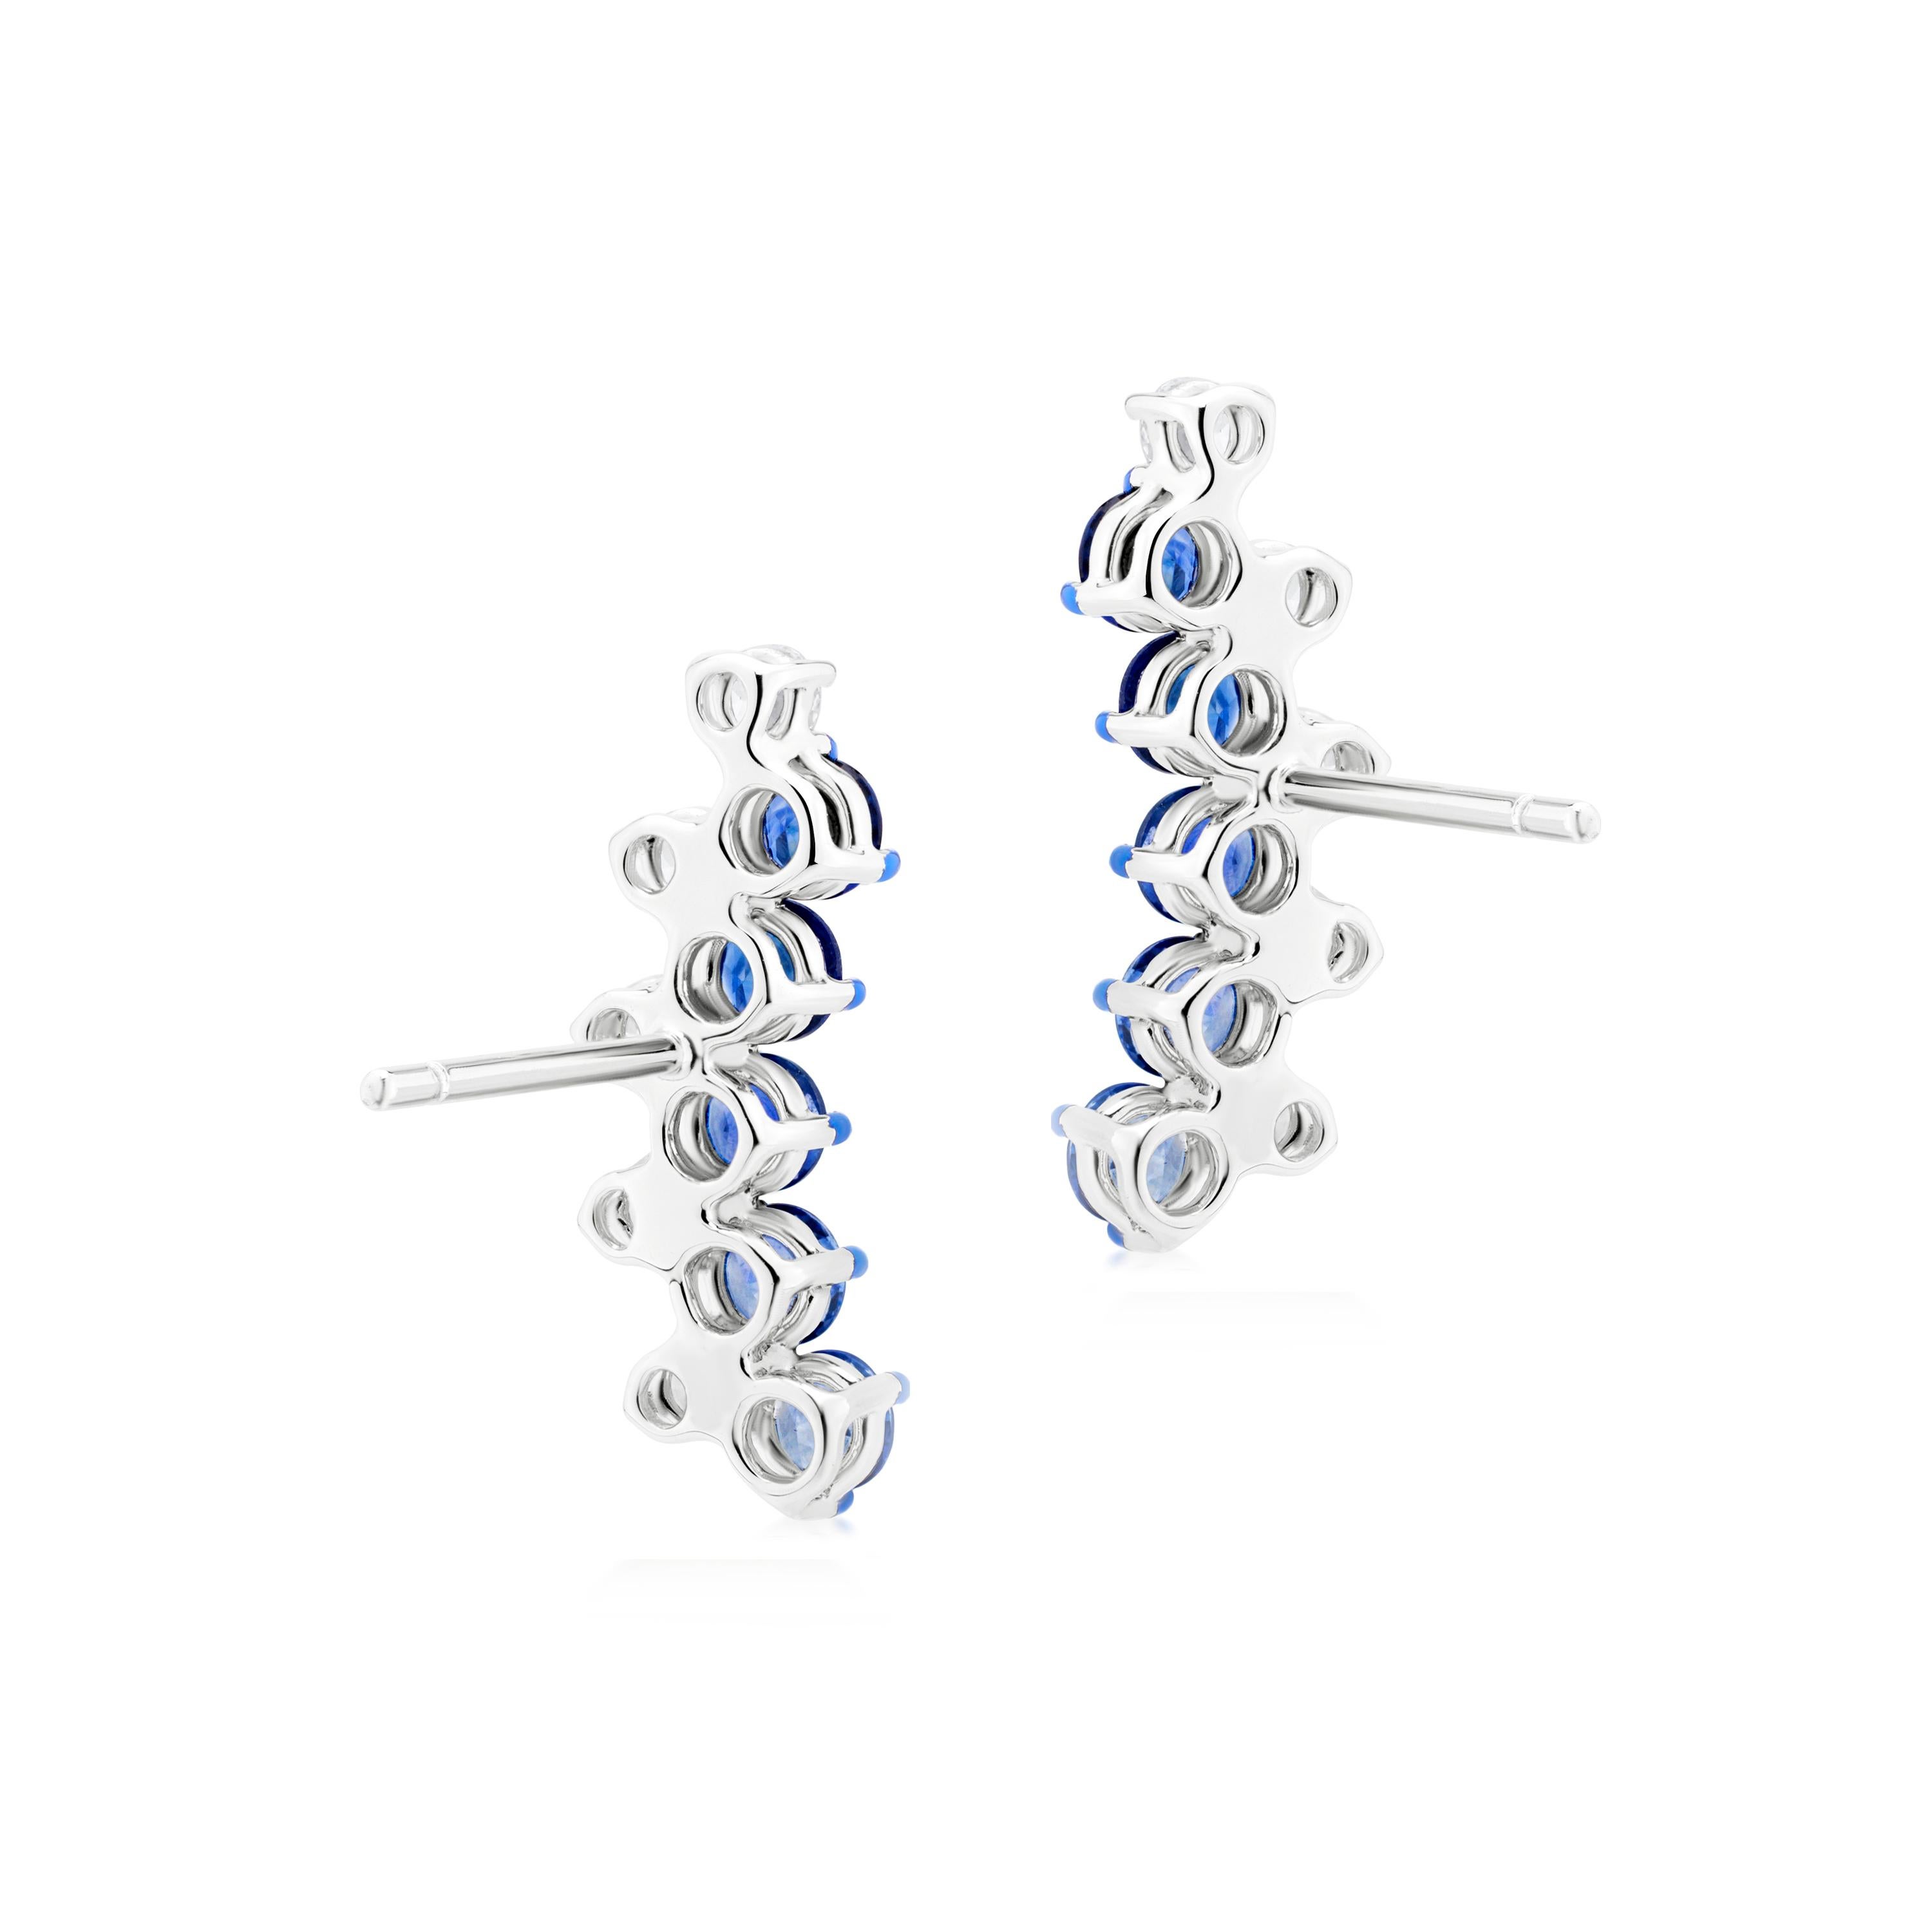 Brilliant Cut Gemistry 1.75 Cttw. Ear Climber with Sapphire and Diamond in 18K White Gold  For Sale